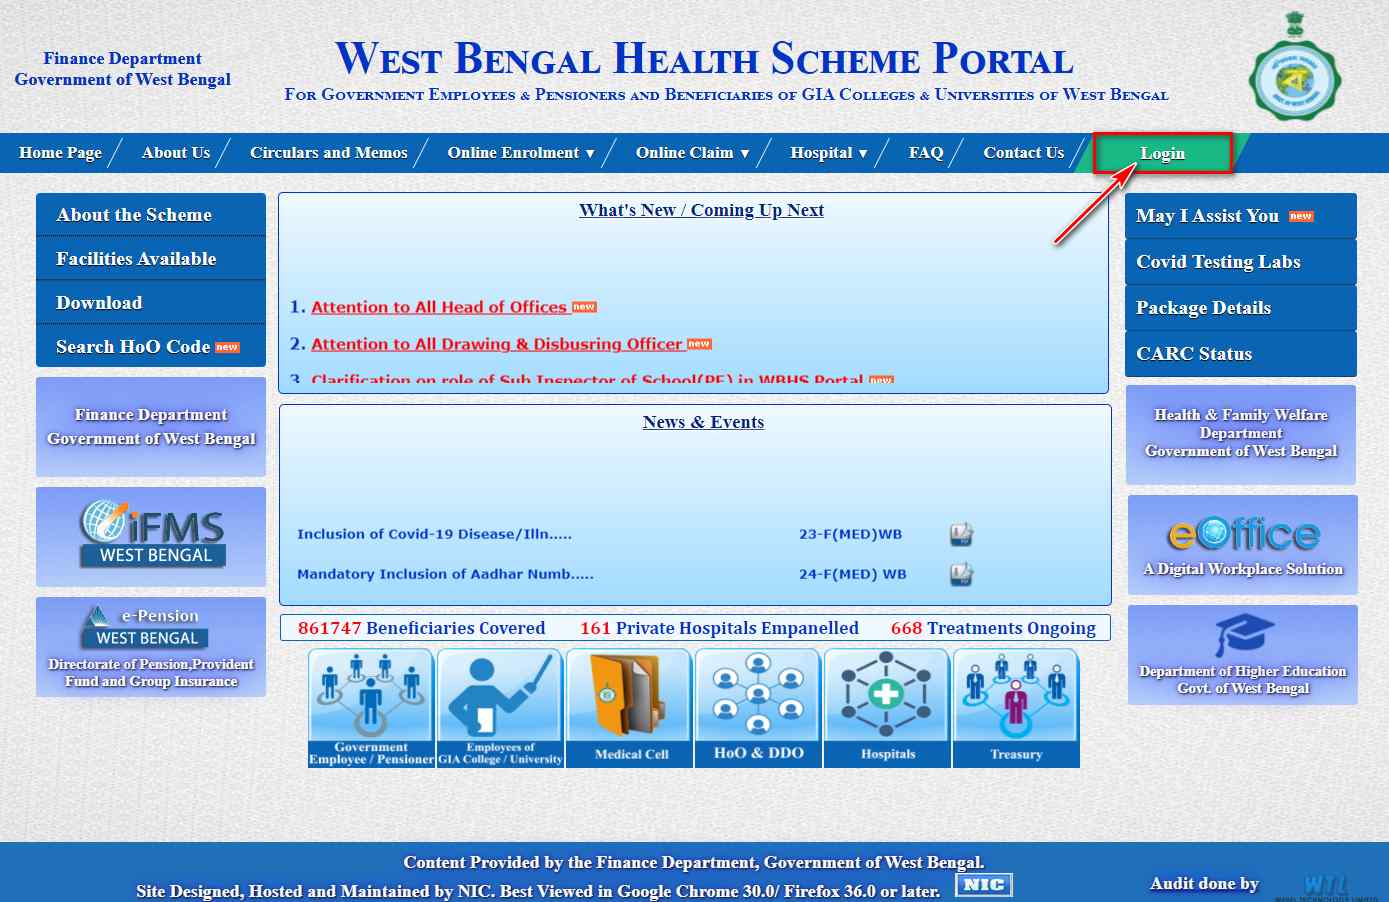 WBHS Portal Home page